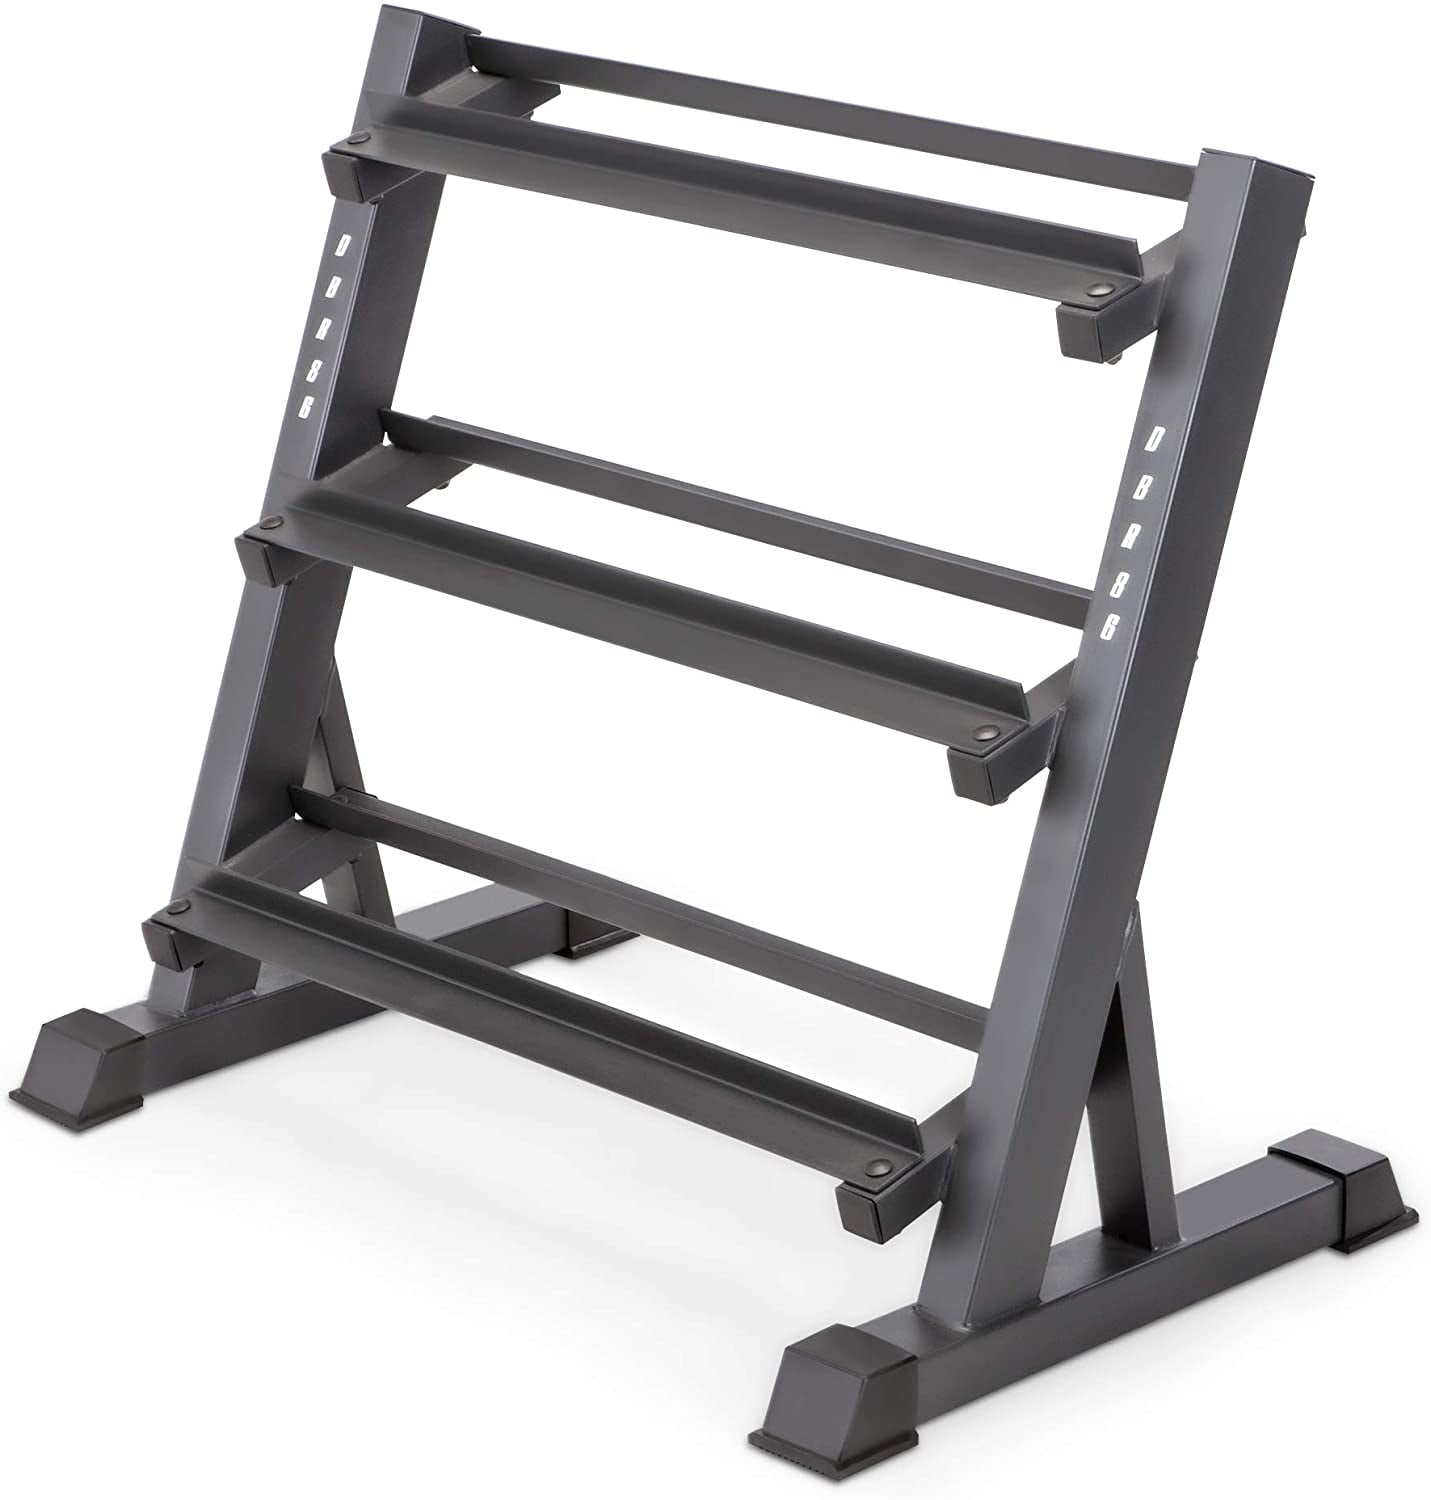 Latest Model Dripex 3 Tier/2 Tier Heavy Duty Dumbbell Rack Home Gym Weight Rack Storage Stand Rack Only Weight Sets/Kettlebell/Weight Plates/Holder